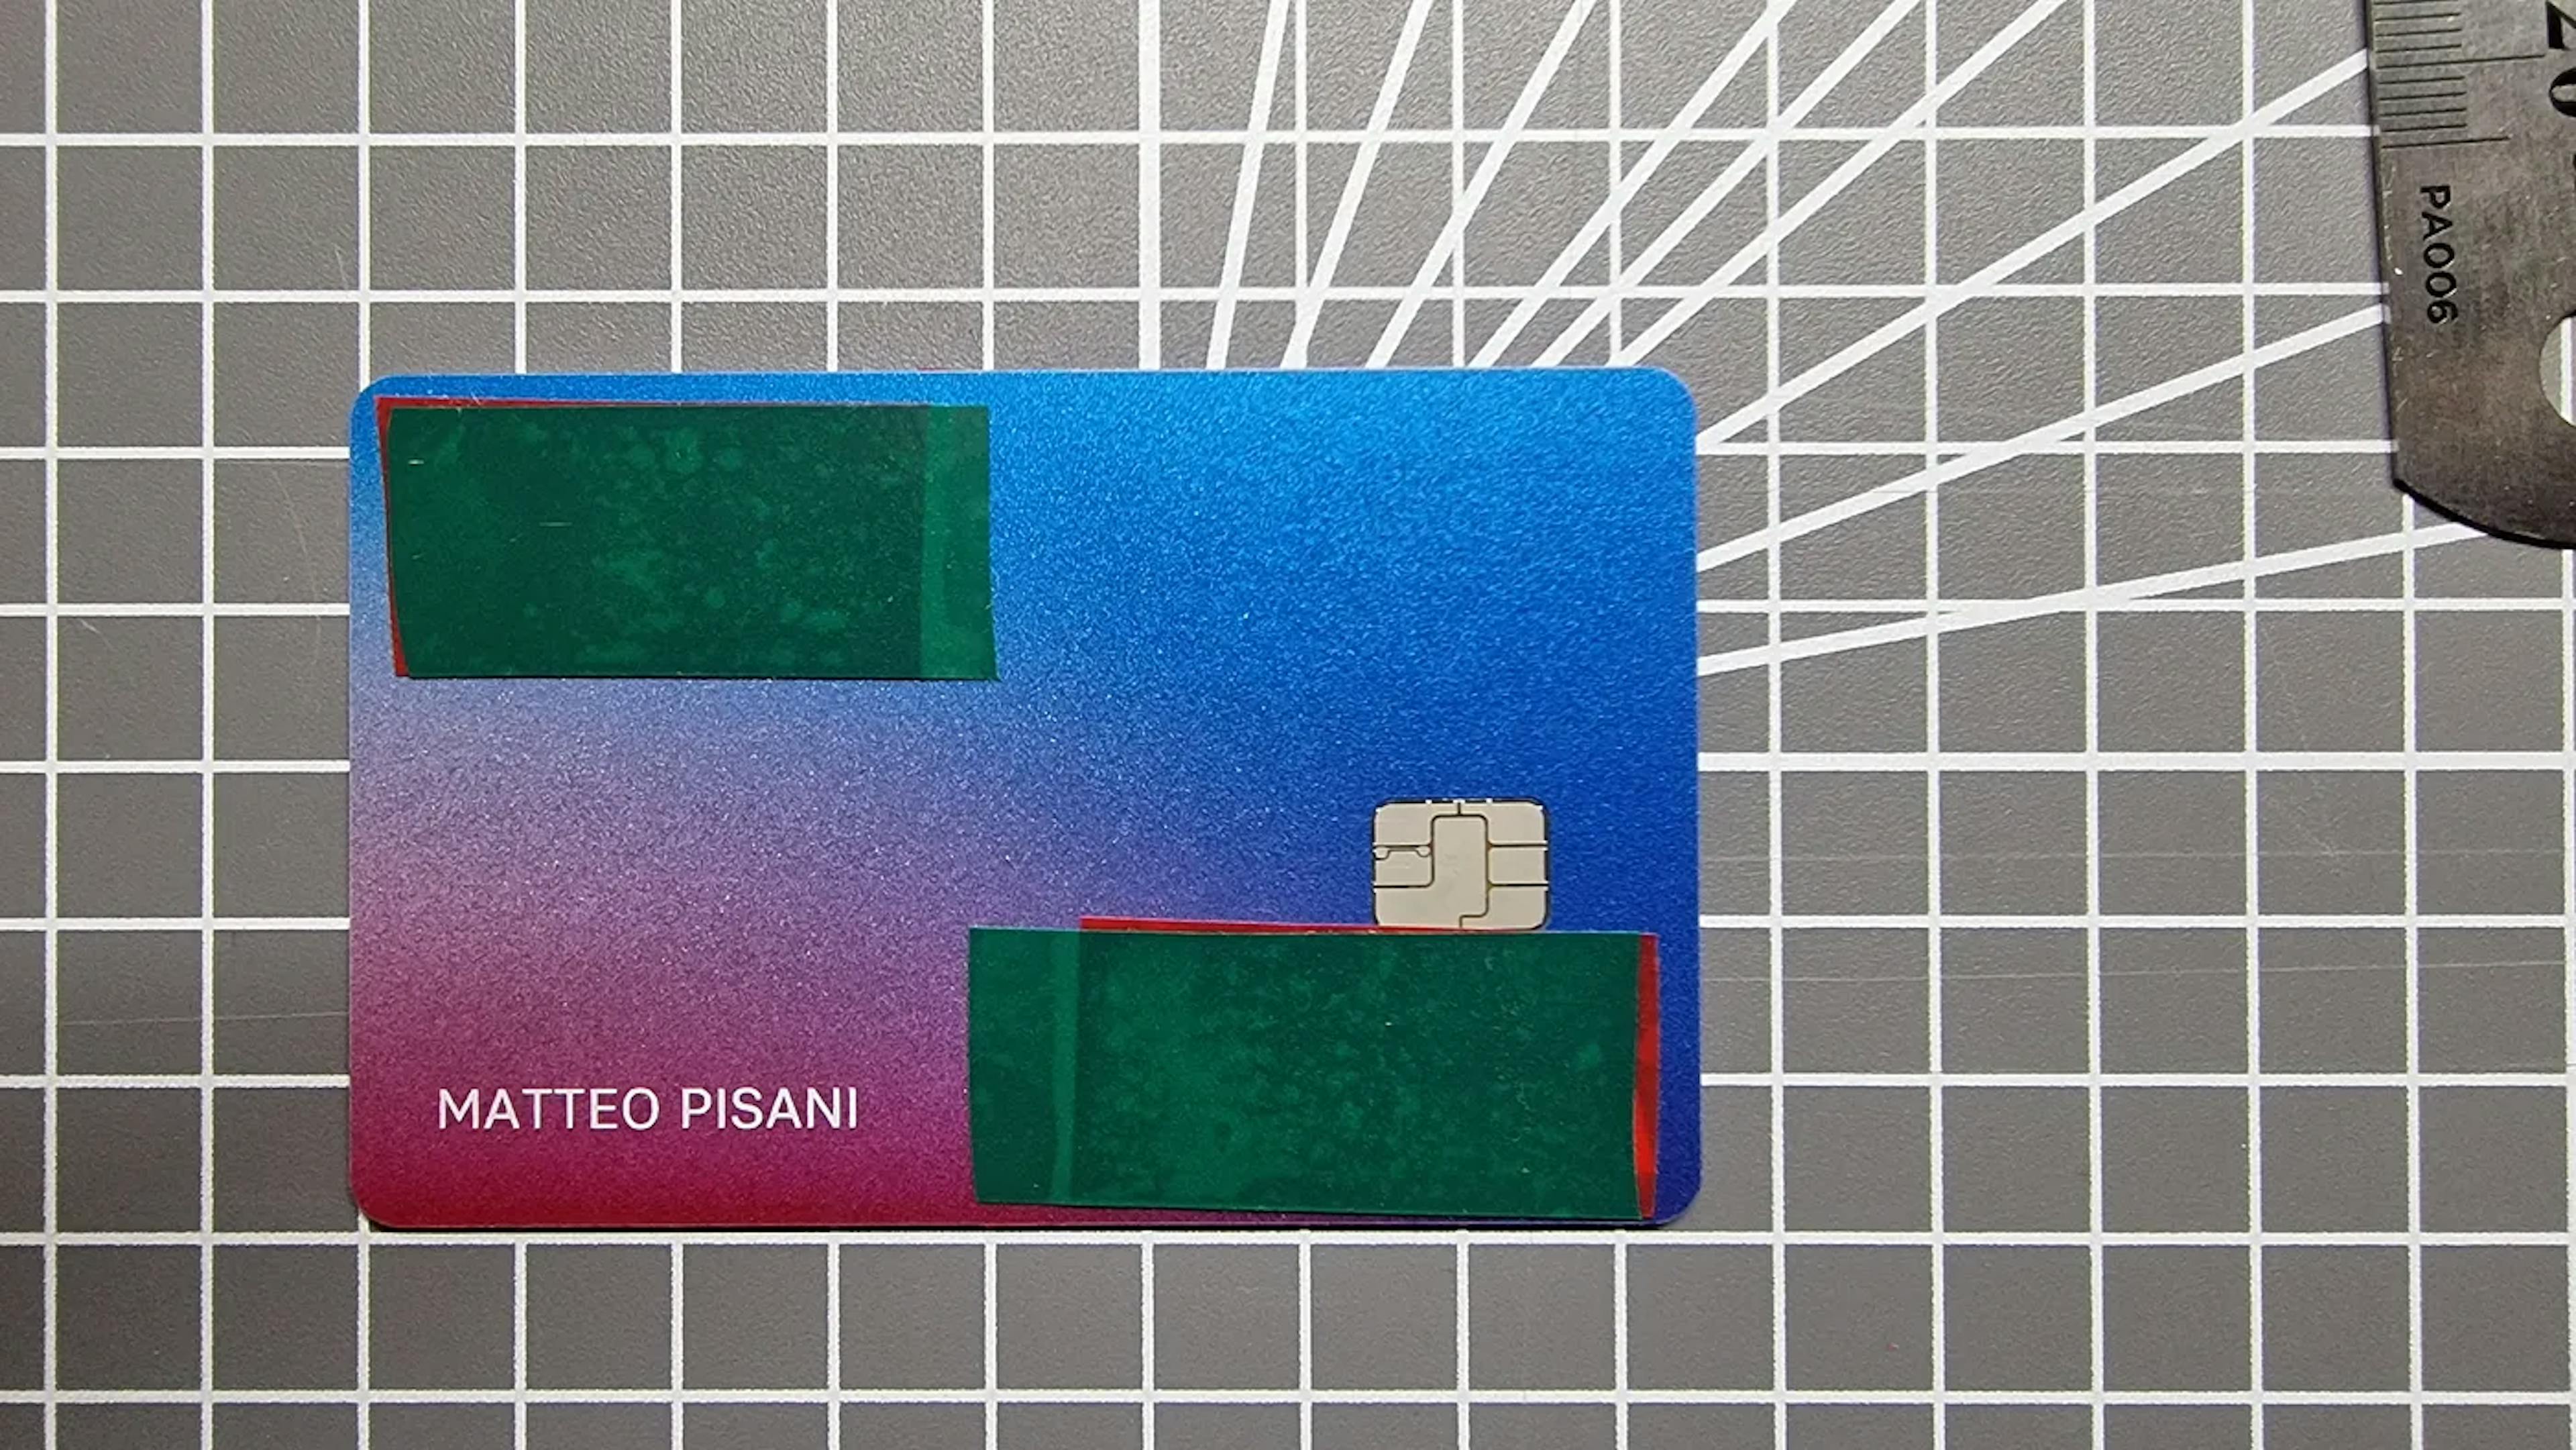 Vendor-censored contactless payment card I own(ed)